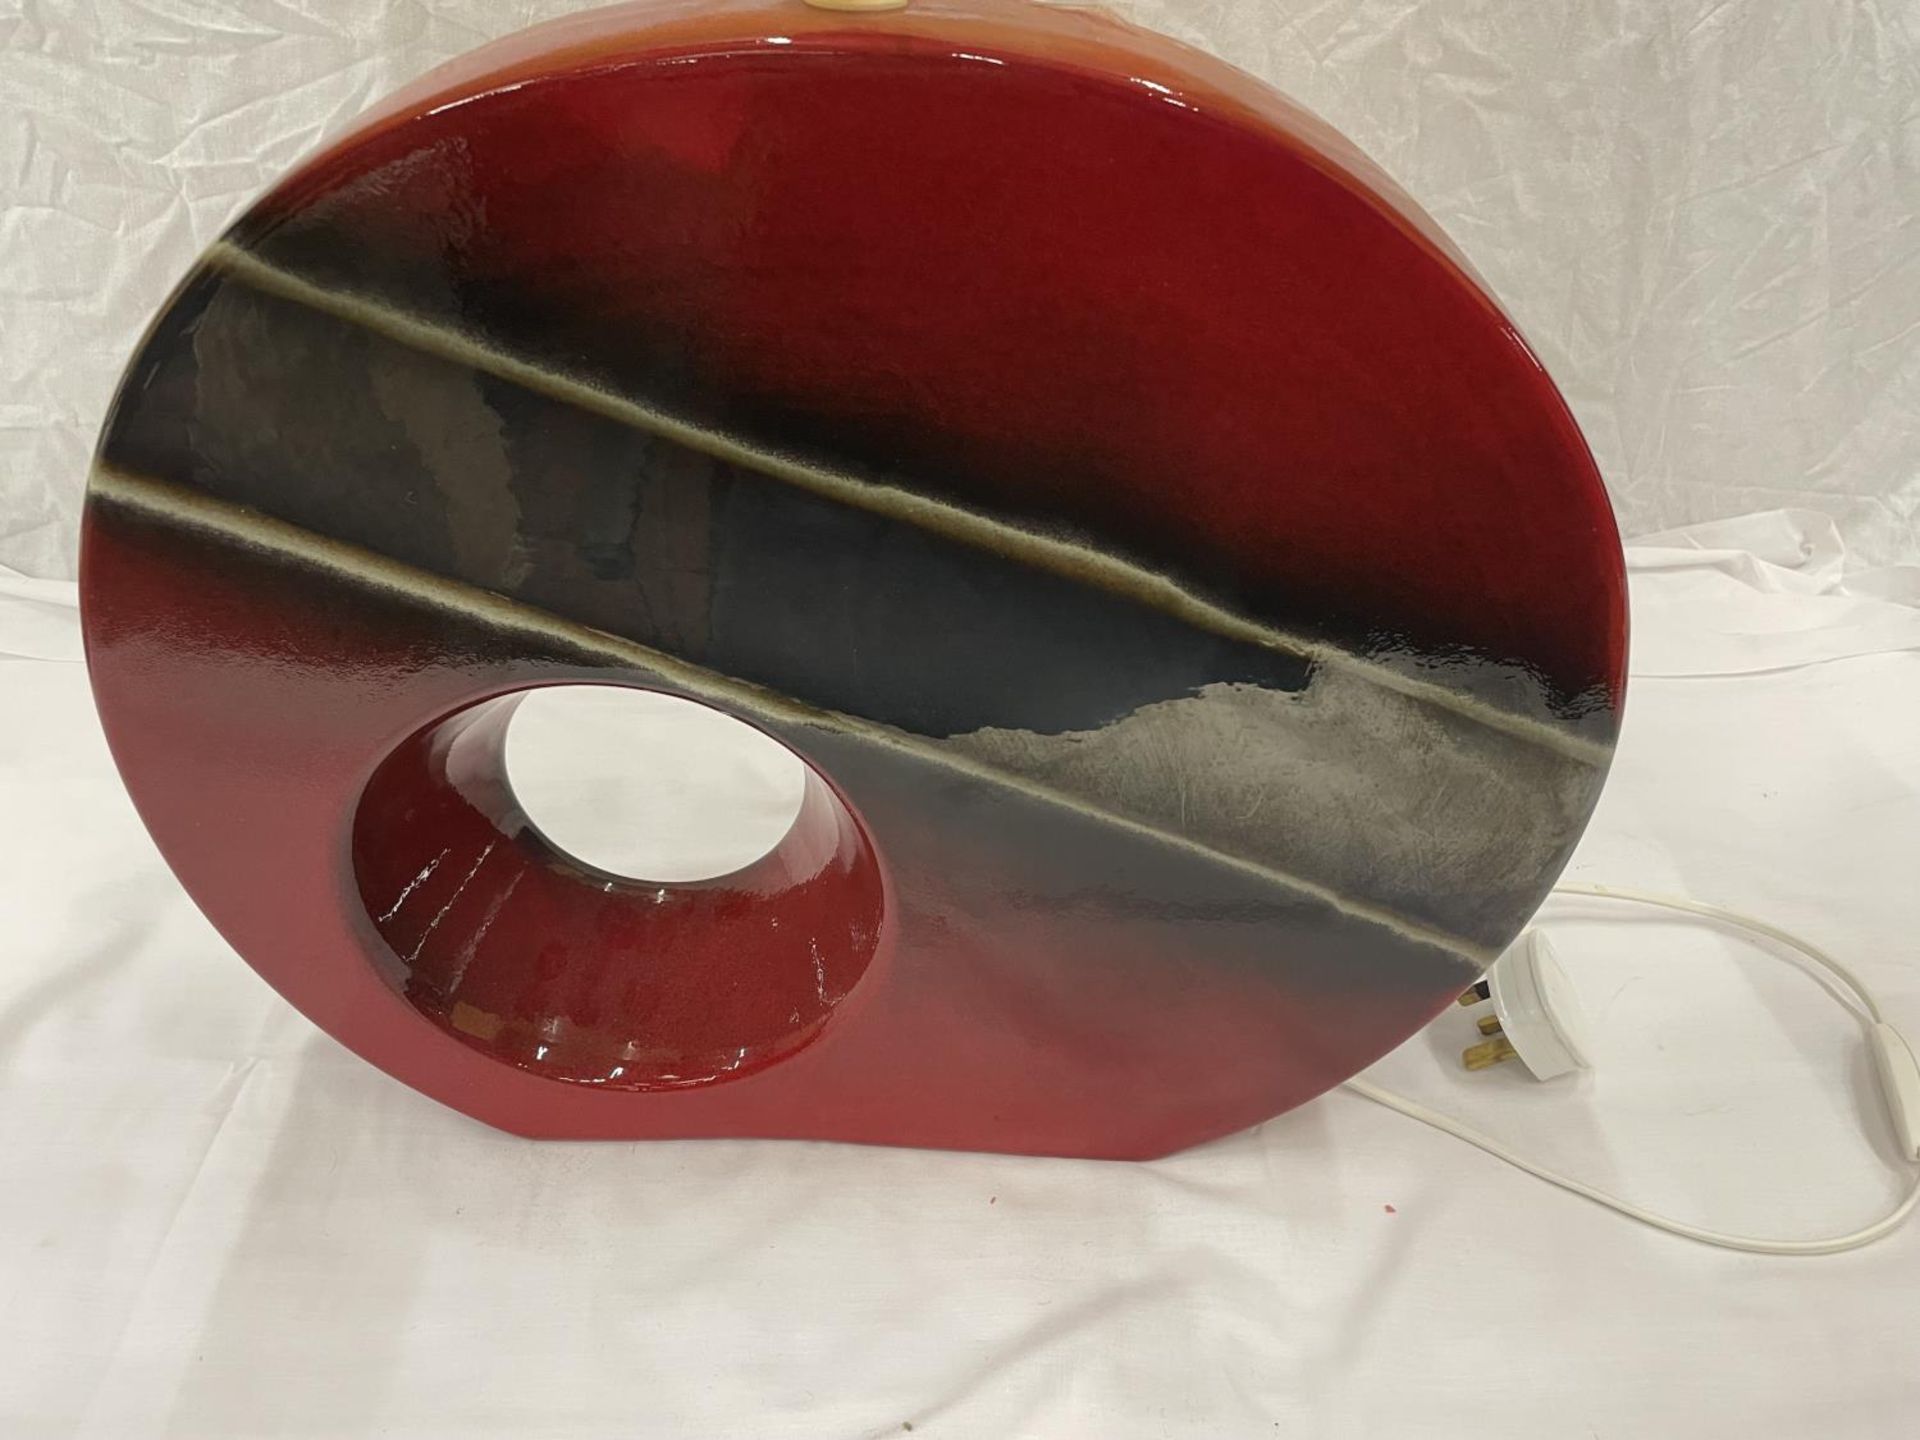 A VERY LARGE ART SCULPTURE ROUND RED LAMP WITH SHADE HEIGHT 40CM, WIDTH 47CM - Image 4 of 6